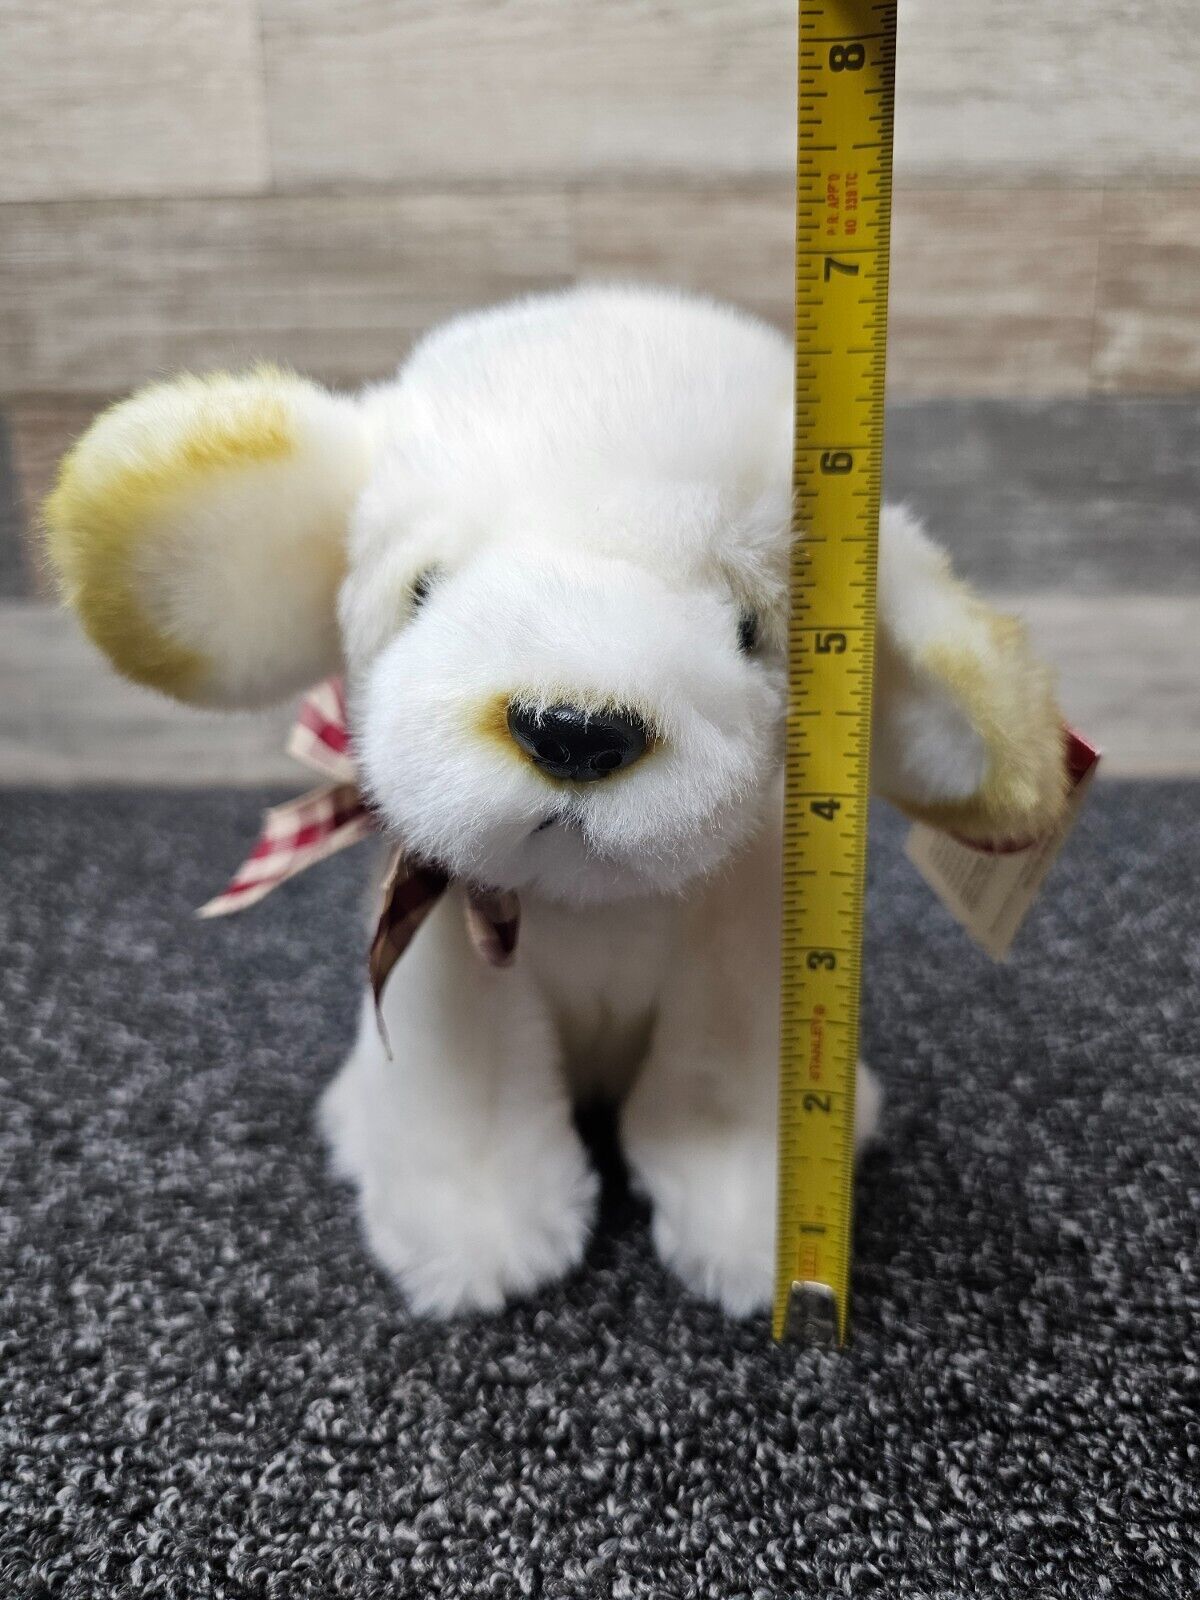 "Nugget"  Stuffed Toy Dog by Russ Berrie & Co. - Cream/White! - $14.50